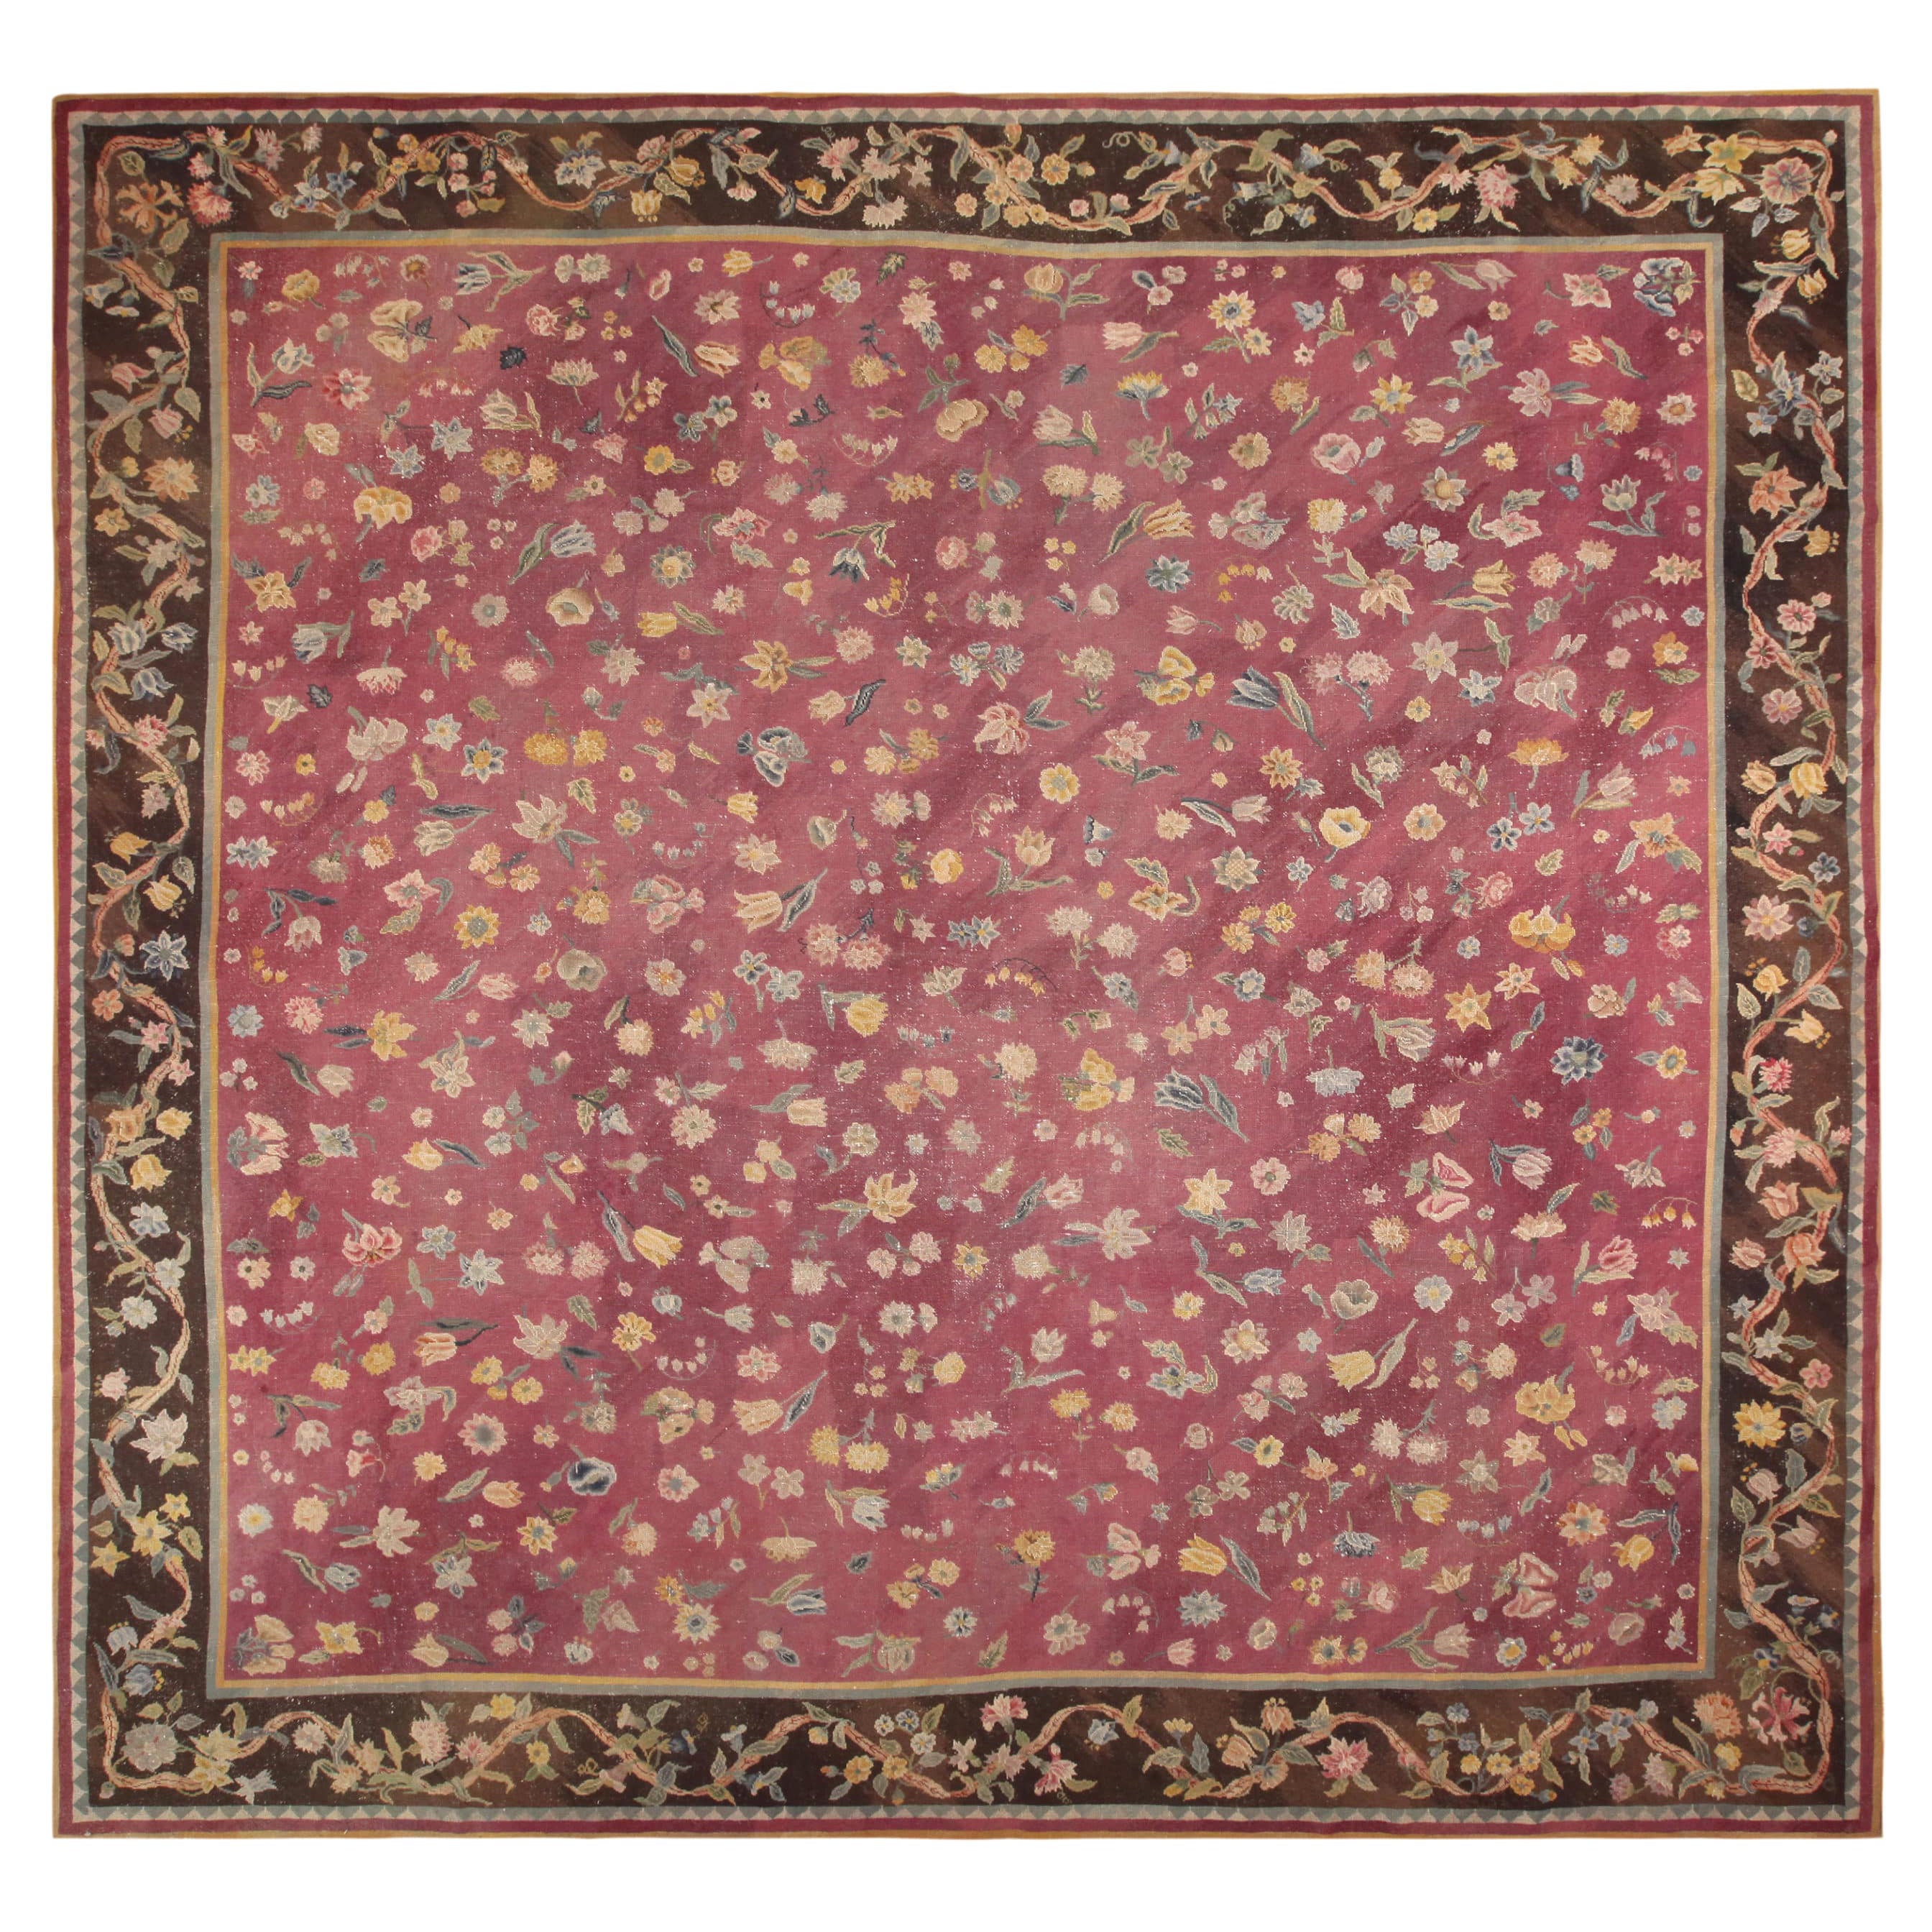 Nazmiyal Collection Antique English Needlepoint Rug. 14 ft 3 in x 14 ft 8 in